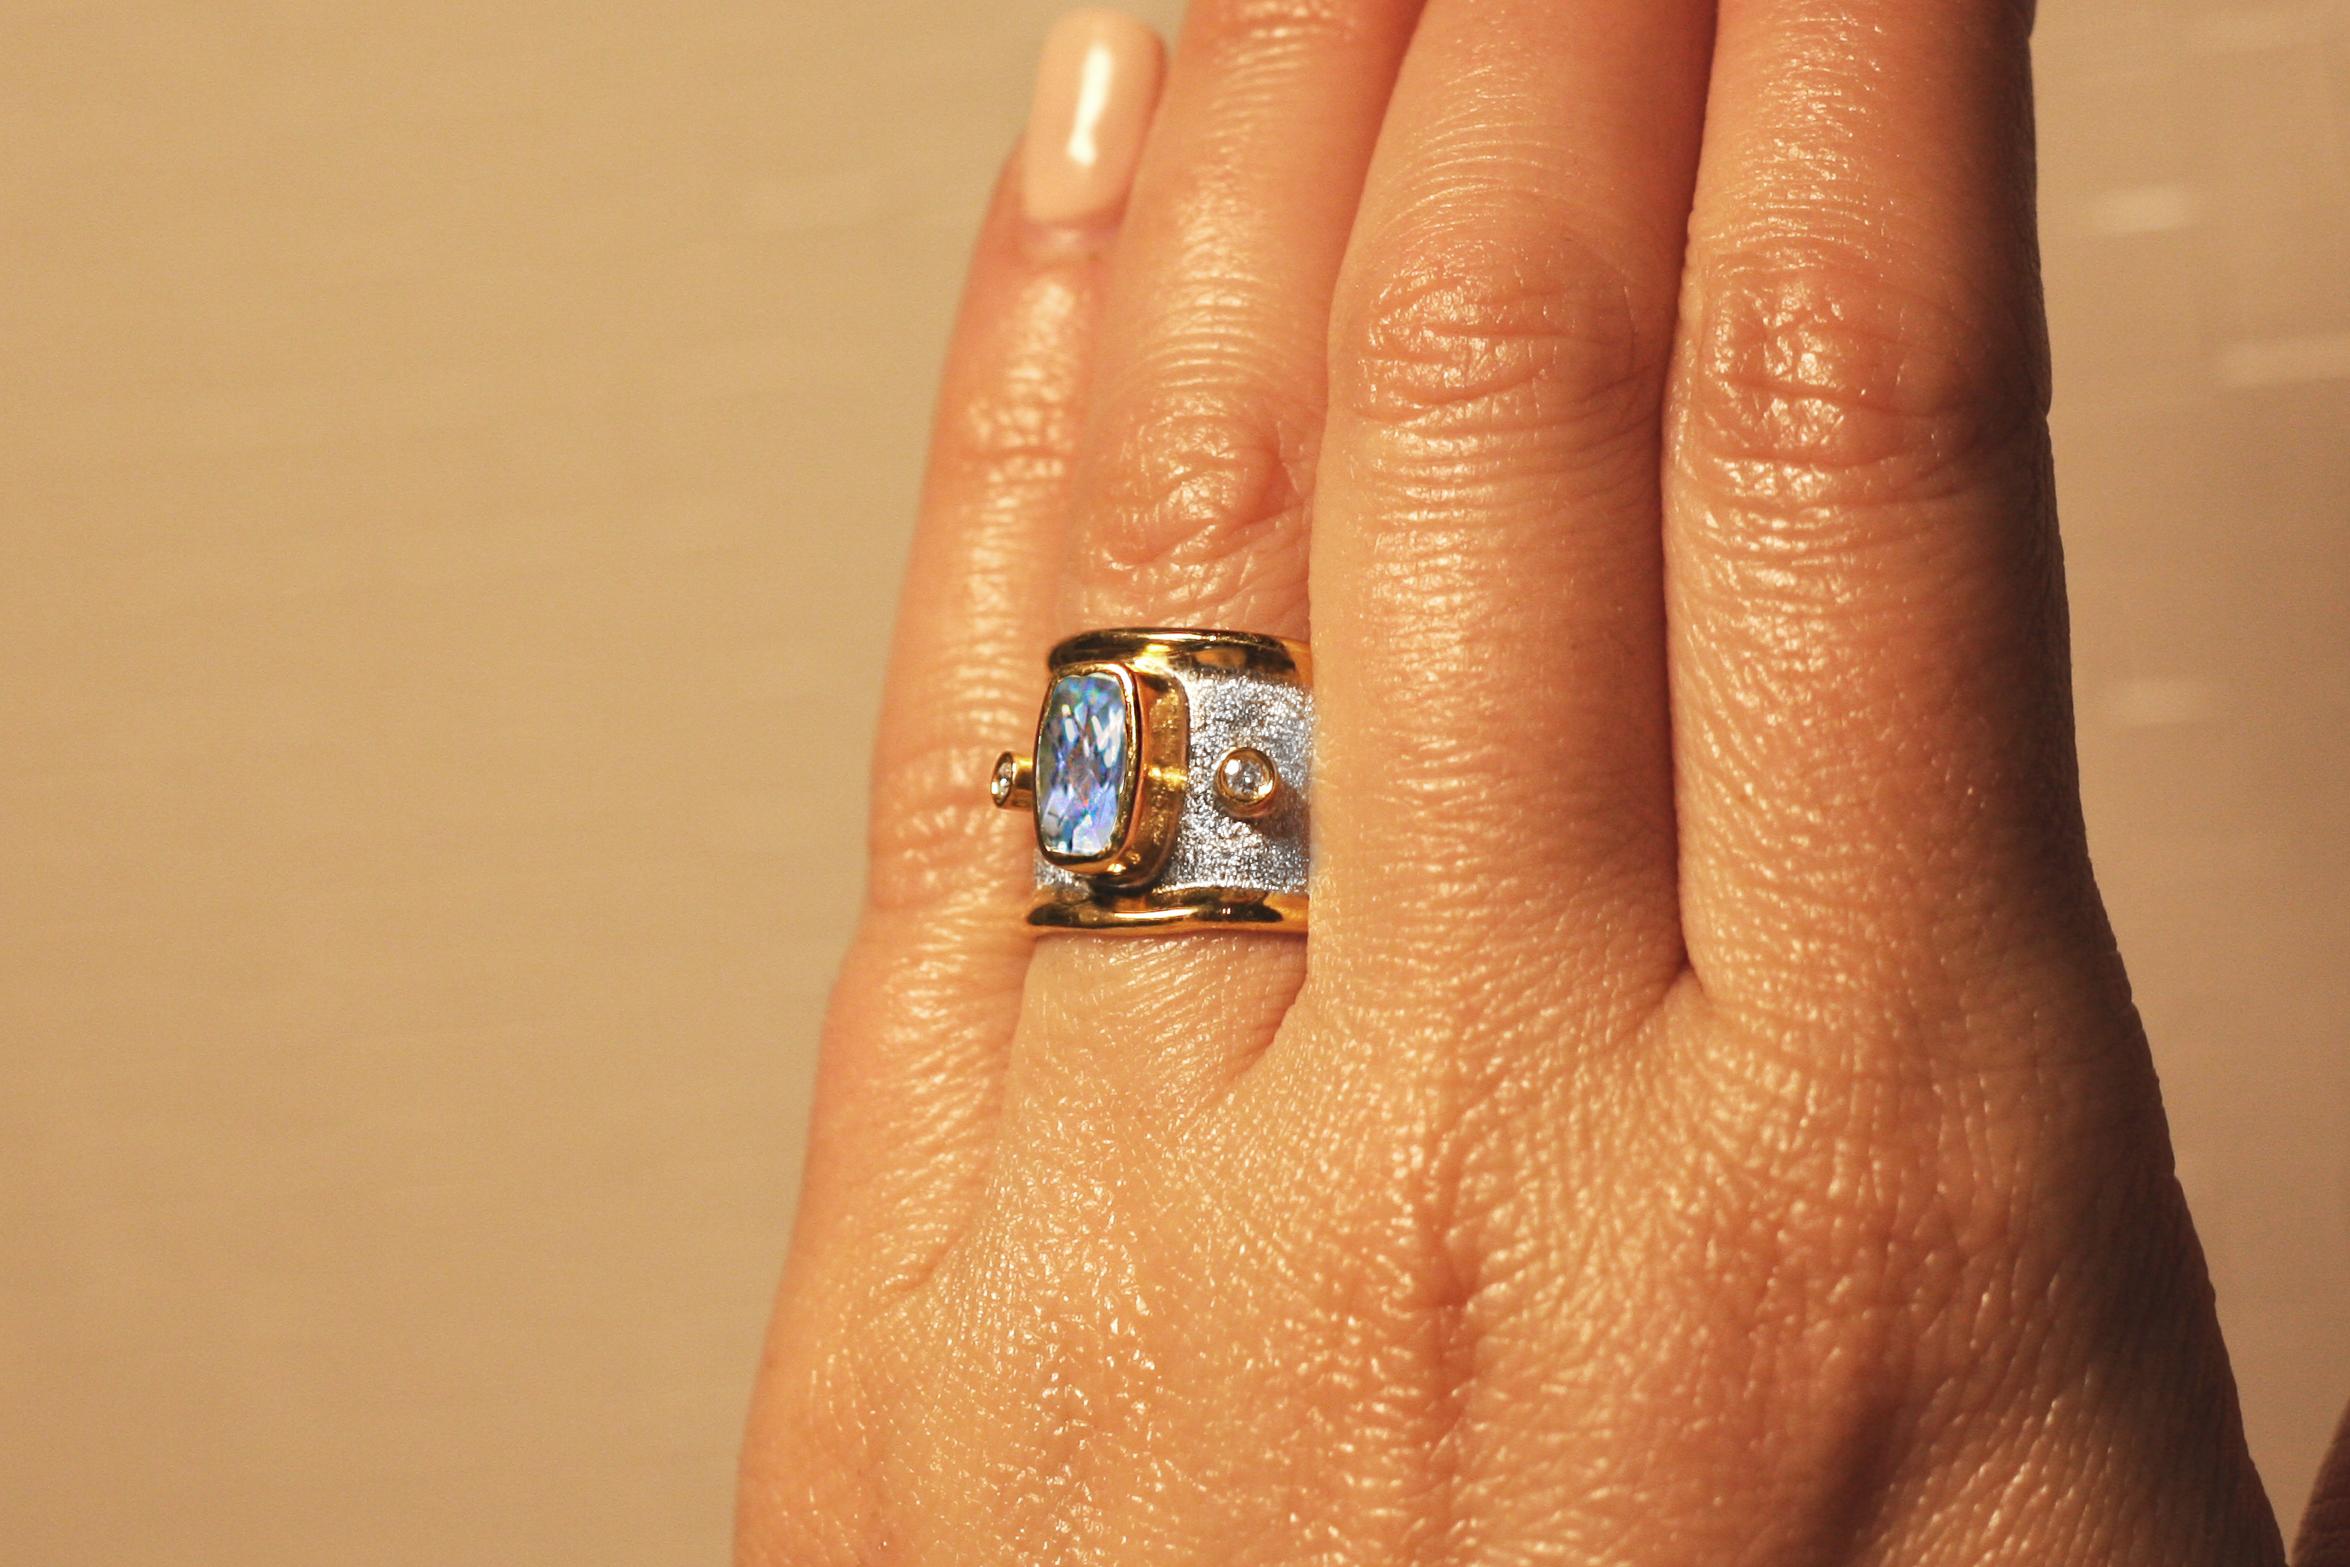 Don't let go this one of a kind Yianni Creations ring with rectangular shaped 2.20 Carat Aquamarine complemented by two brilliant cut diamonds of total weight 0.06 Carat. Yianni, the designer loves stones and when he comes across some special stone,